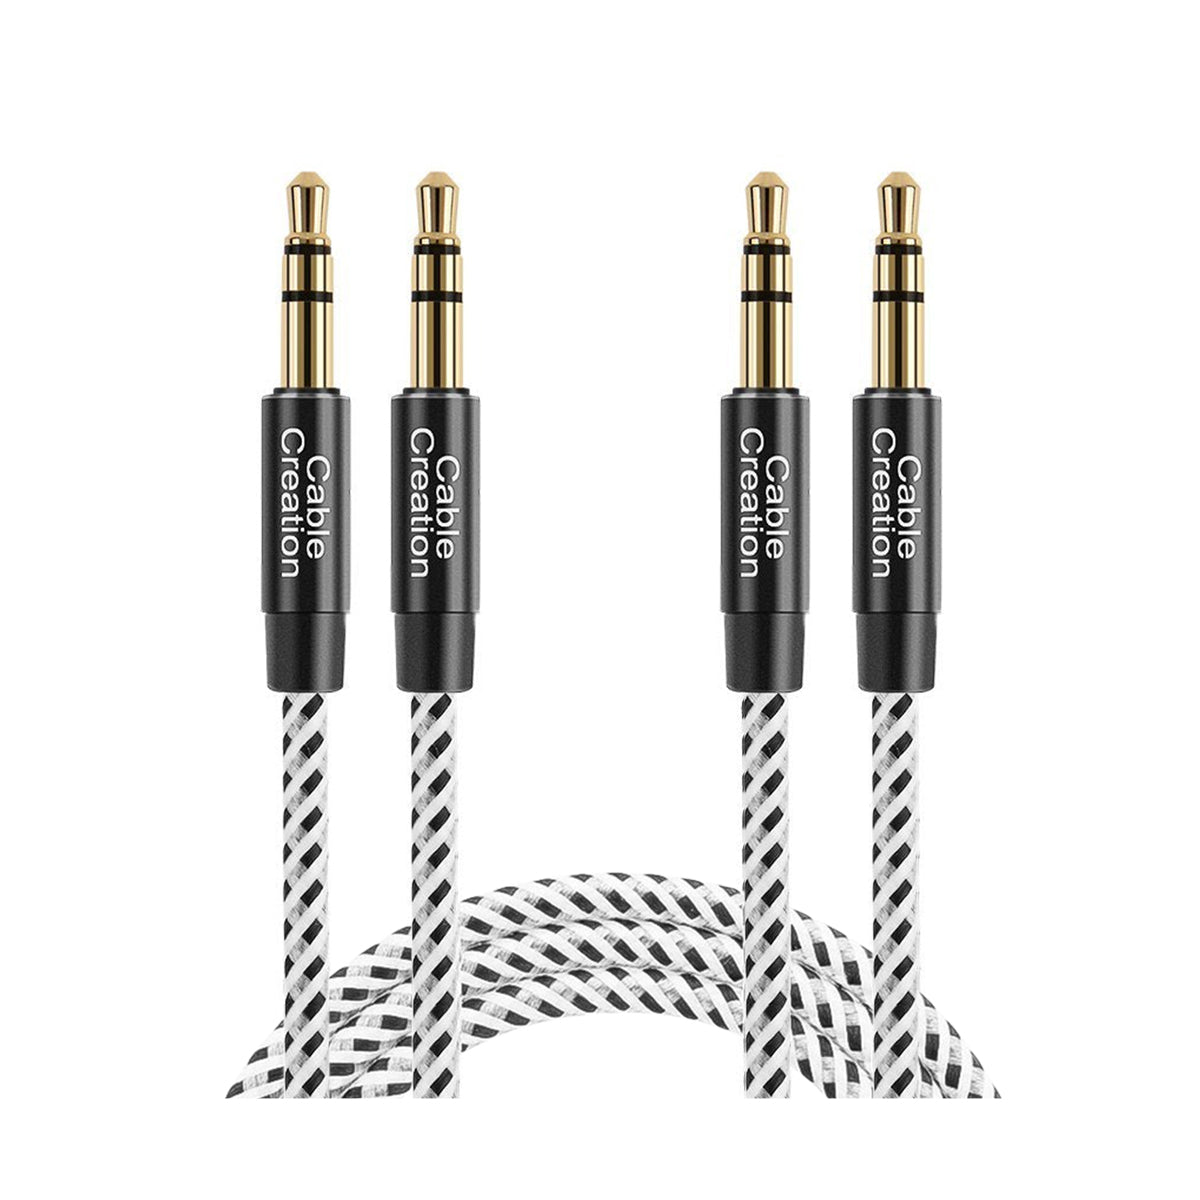 3.5mm Audio Extension Cable, CableCreation 3.5mm Male to Female Stereo  Audio Cable with Gold Plated Connector, 1.5Feet